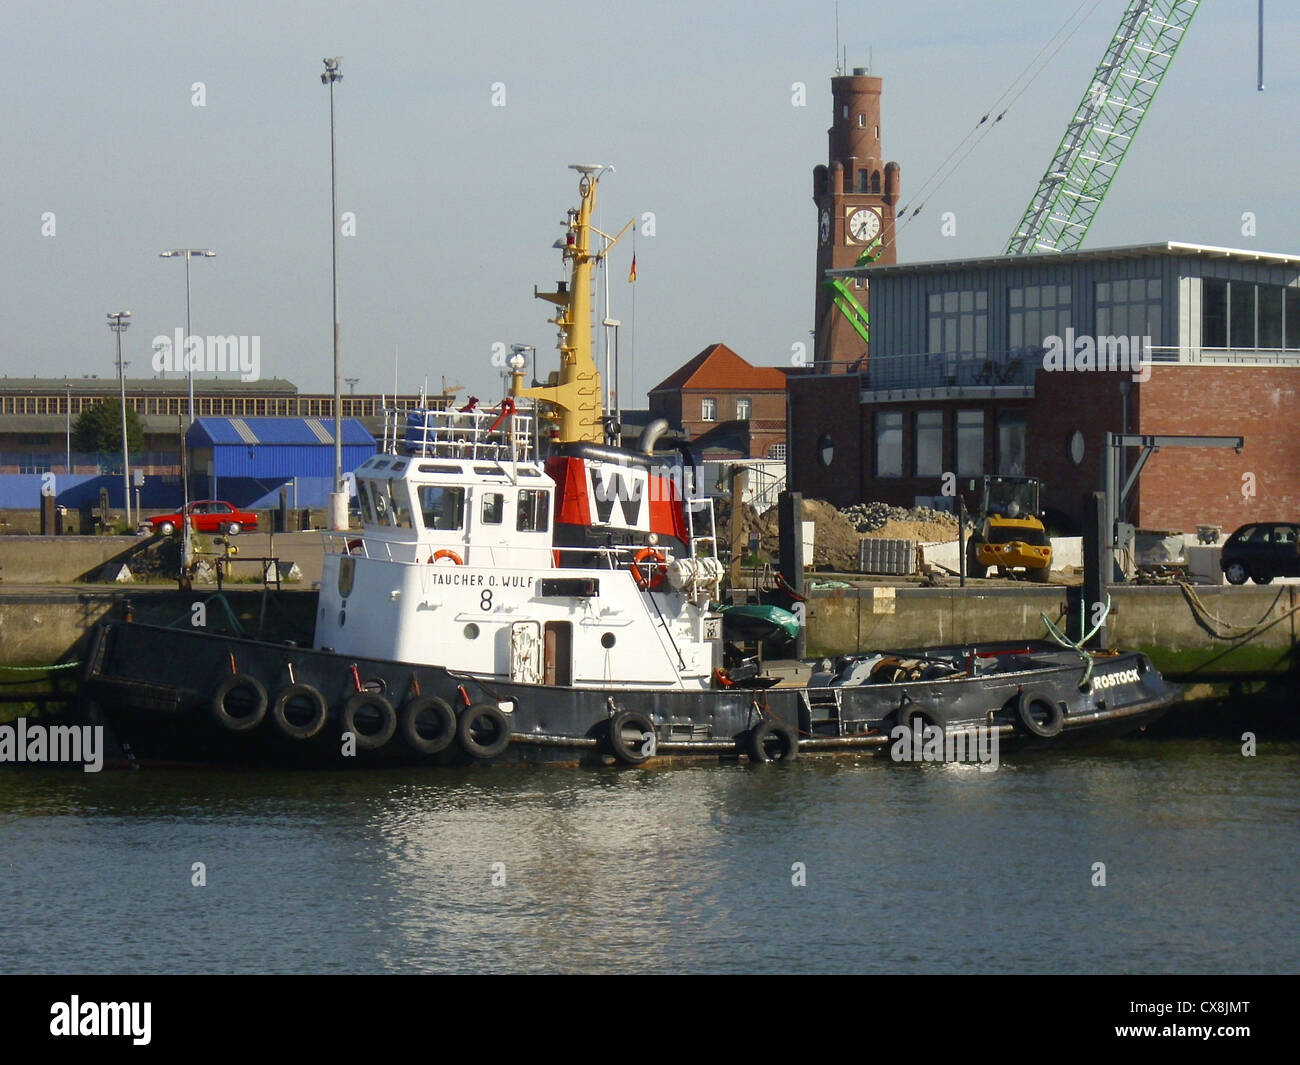 The tugboat '''Taucher O. Wulf 8''' in the port of Cuxhaven, Germany Stock Photo